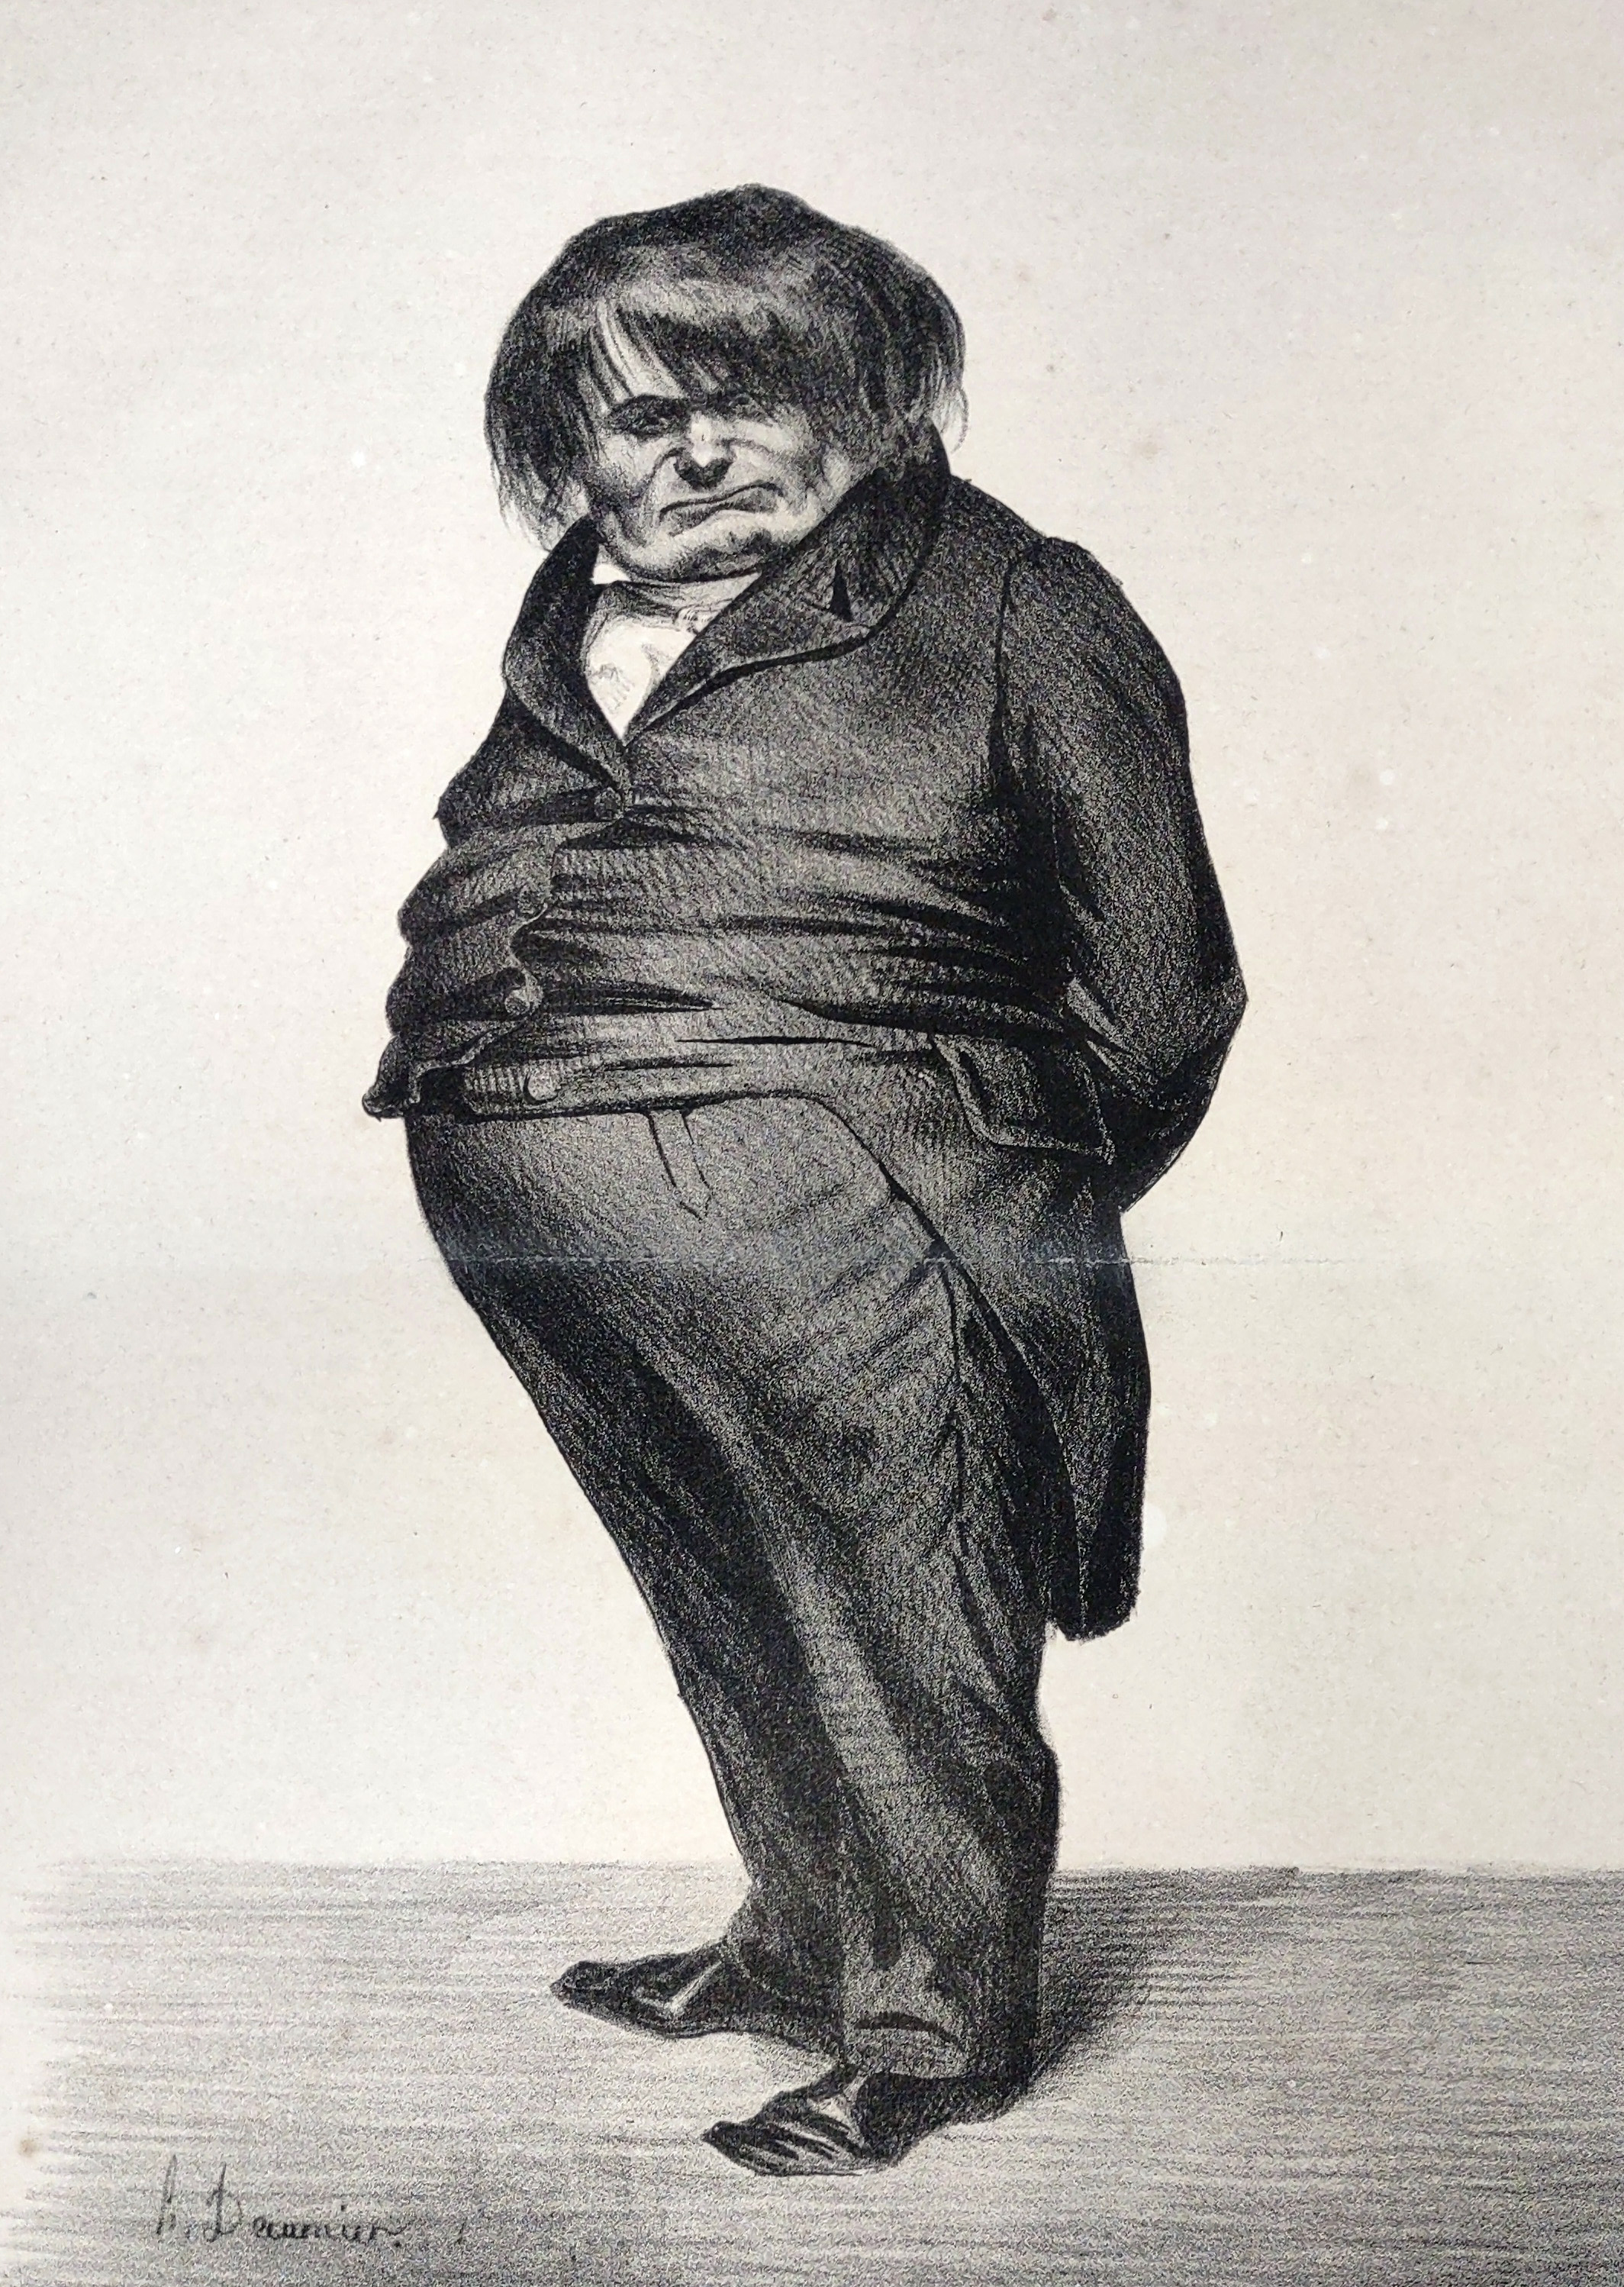 Artwork of Mr. Prune (Clemente Prunelle) by Honore Daumier